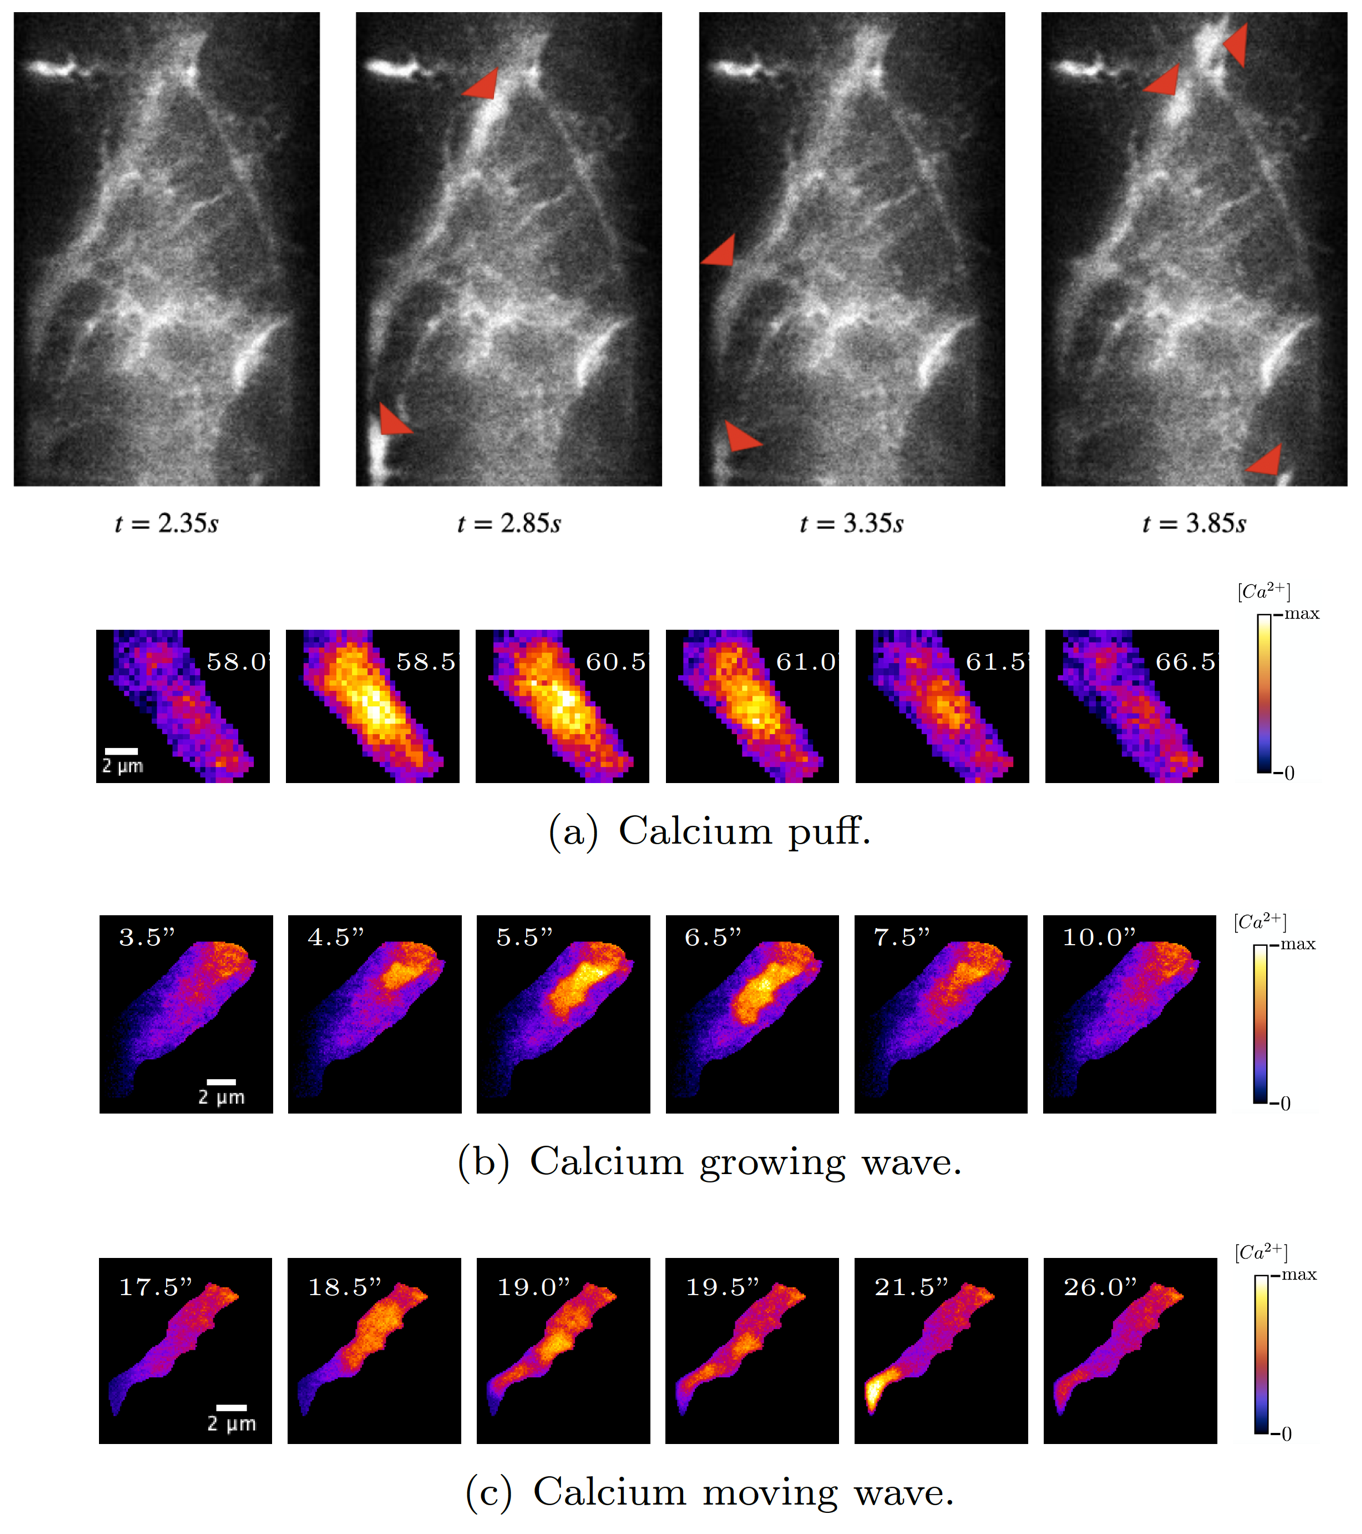 Frames from our simulated 2D+time LLSM images. Red triangles: changes in calcium signals (top). Maximum intensity projections of calcium puff (a) and waves (b)-(c) from our simulated 3D+time LLSM images (bottom).